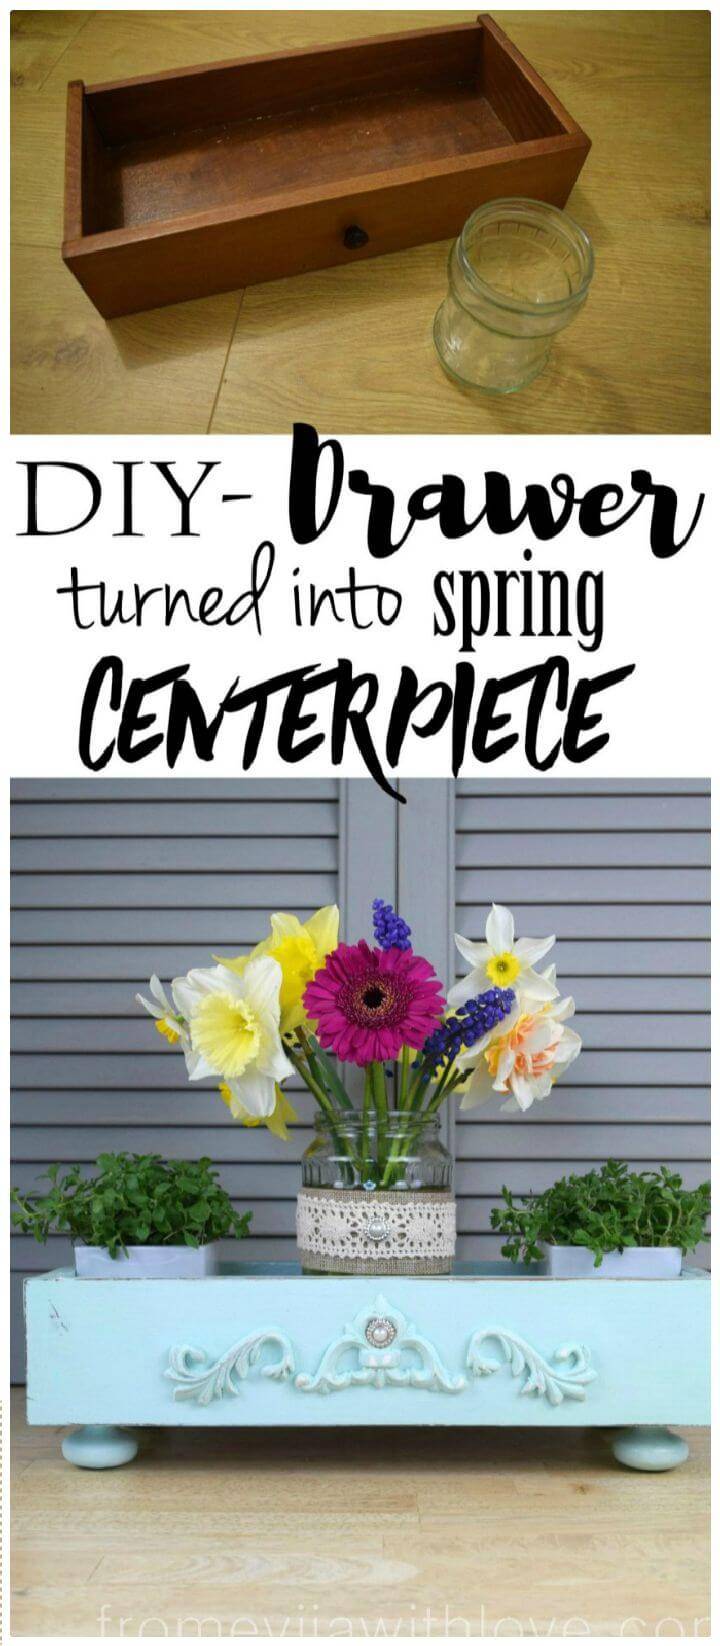 DIY Drawer Turned Into Spring Centerpiece